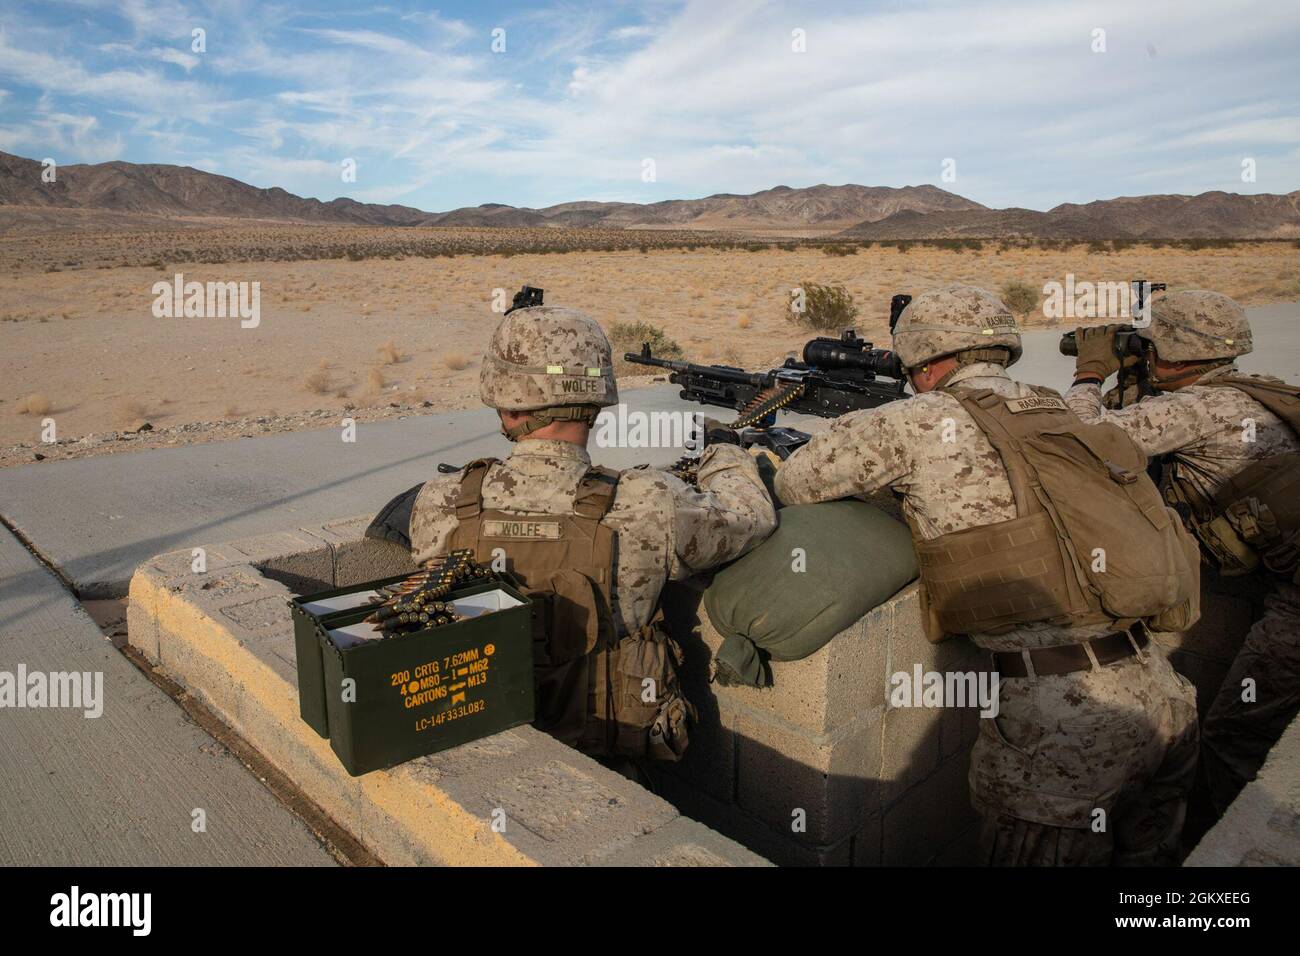 U.S. Marines with Co. K, 3rd Battalion, 7th Marine Regiment (3rd Bn., 7th Marines), 1st Marine Division, shoot an M240B machine gun during a squad defense range at Marine Corps Air Ground Combat Center Twentynine Palms, California, July 16, 2021. Marines with 3rd Bn., 7th Marines participated in various training exercises to compete for ‘best squad’ in preparation for Super Squad. Stock Photo